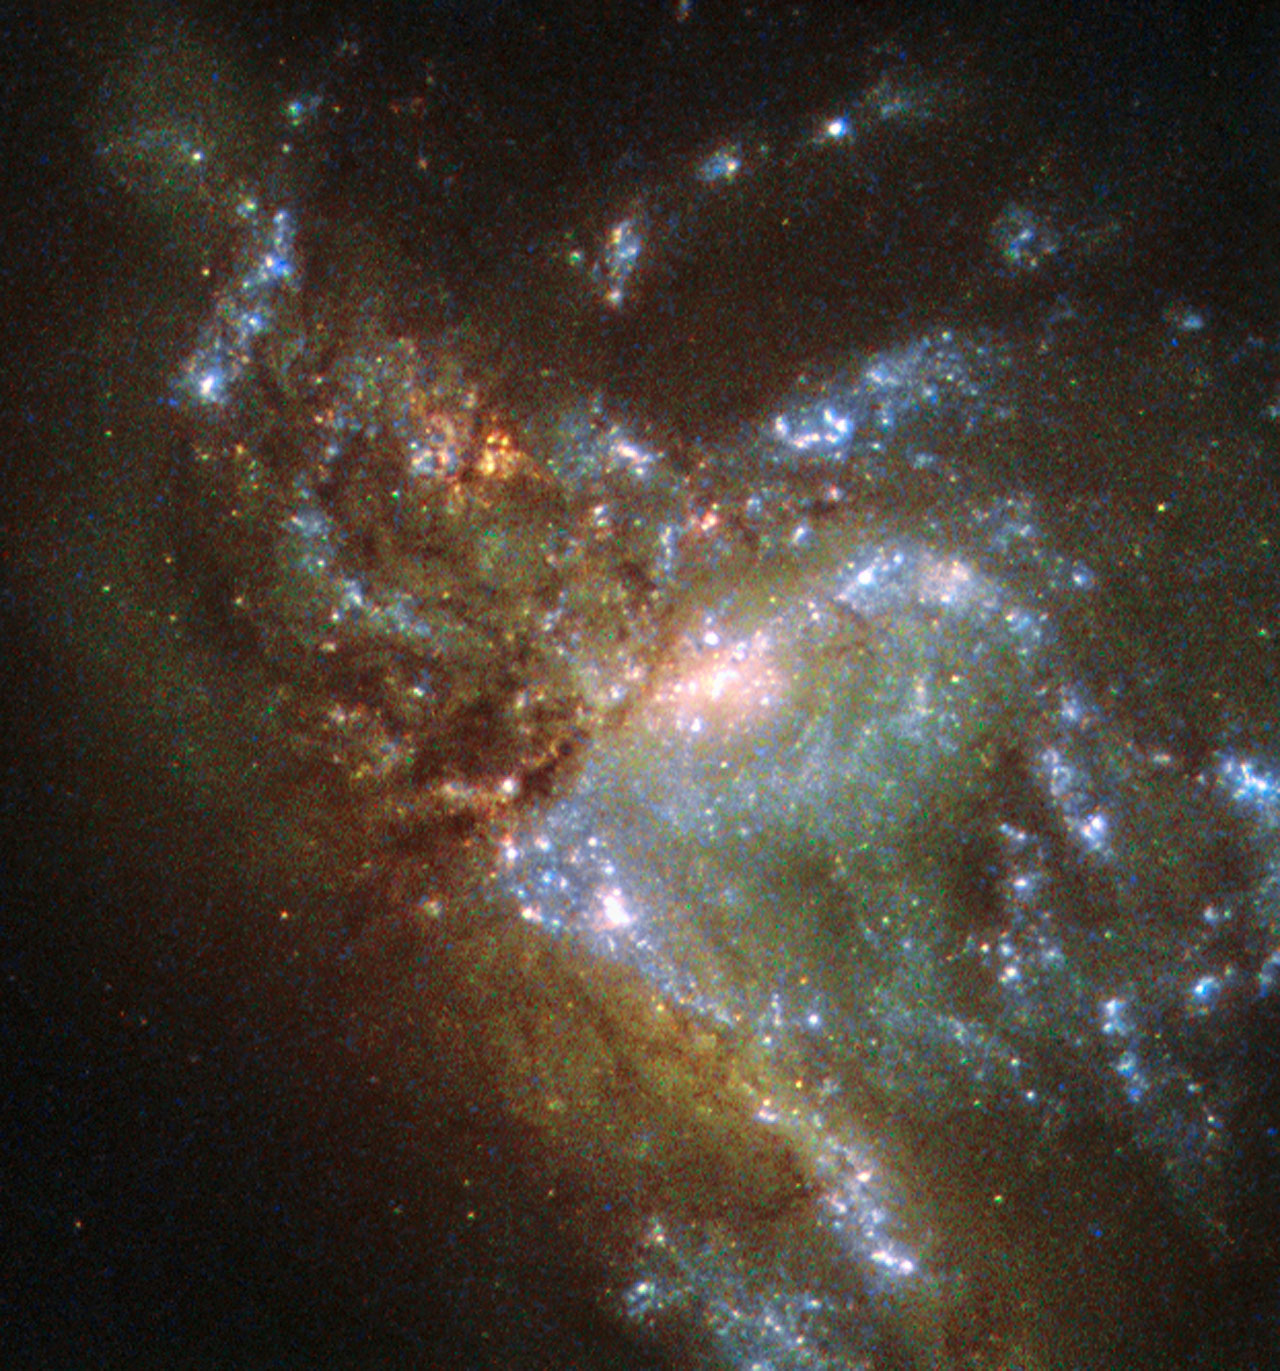 A Hubble image of galaxy NGC 6052 in the constellation of Hercules